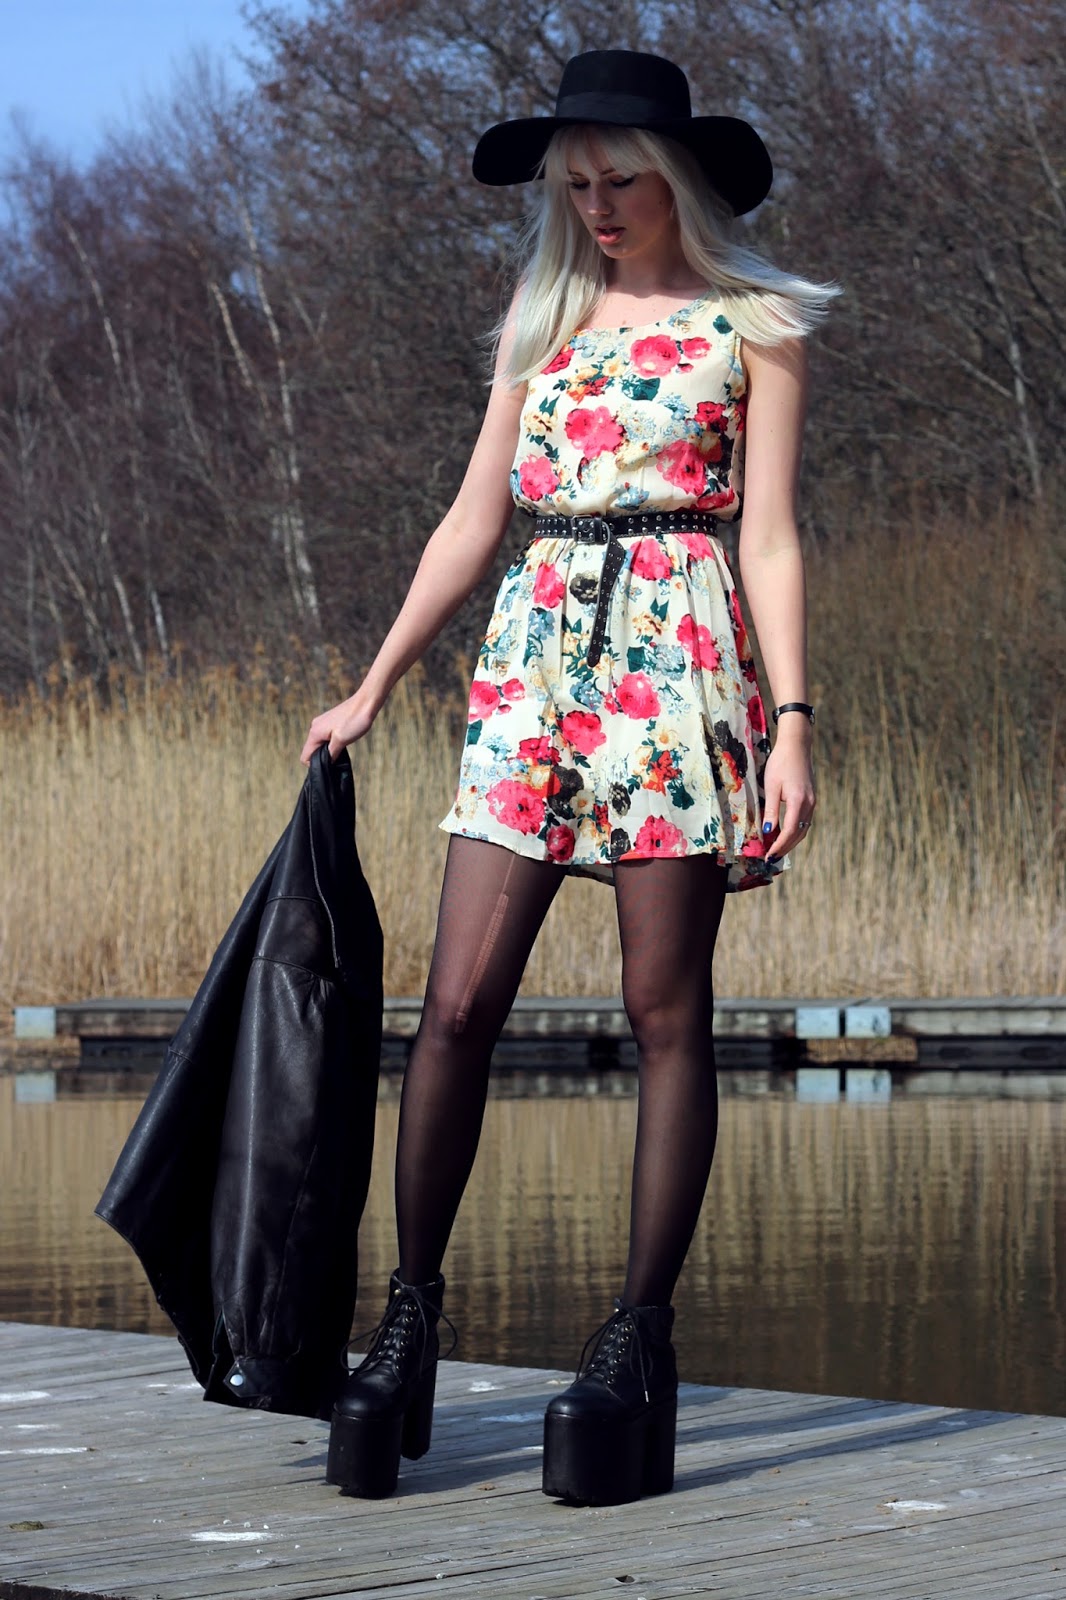 Style eclectic : susext.blogspot.co.uk - Fashionmylegs : The tights and ...